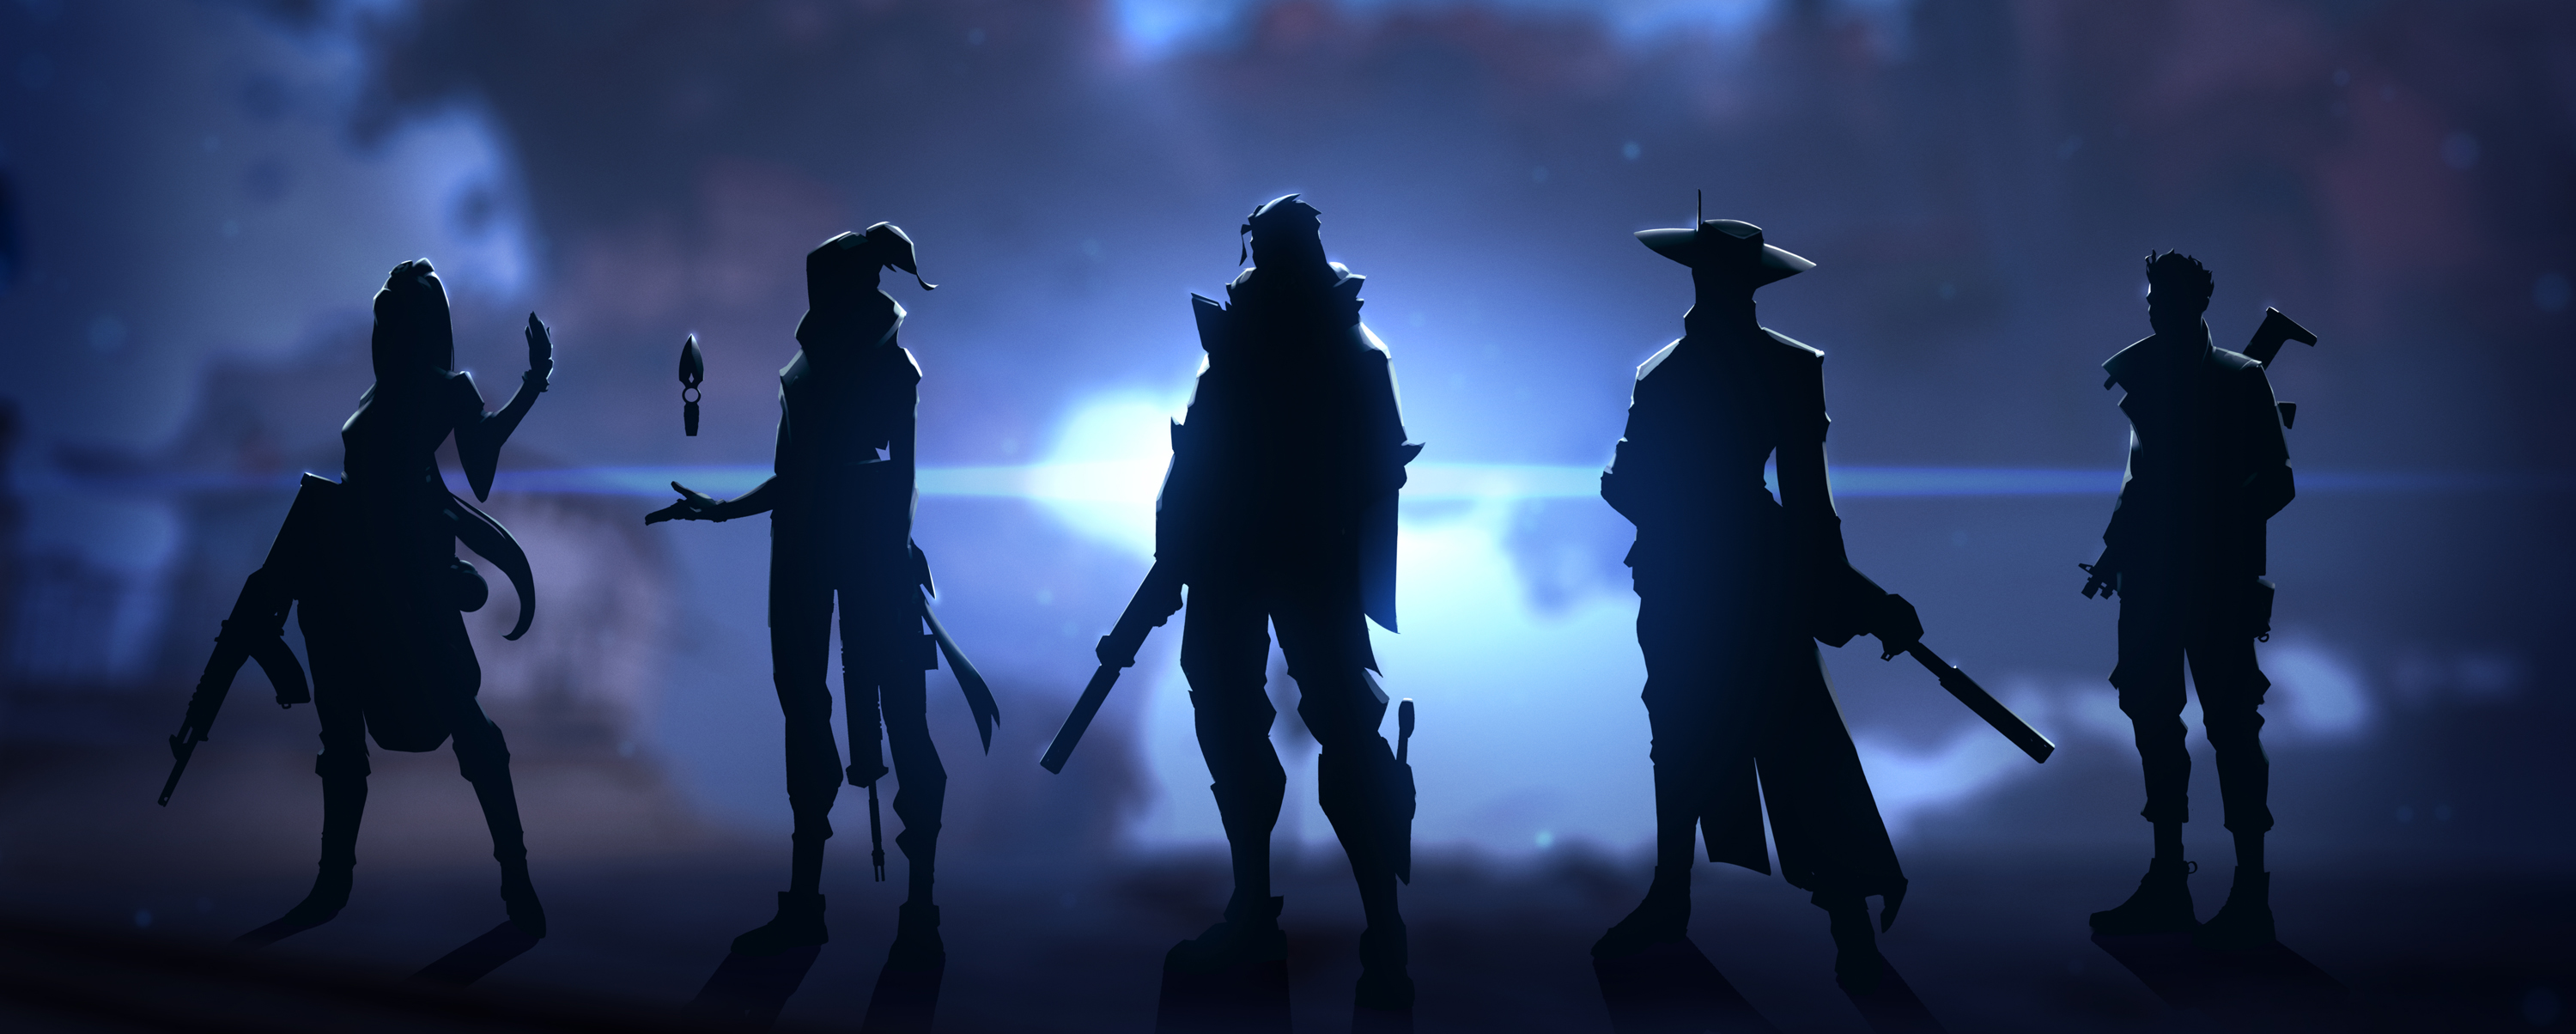 Five Valorant character stand in silhouettes against a dark and foggy background